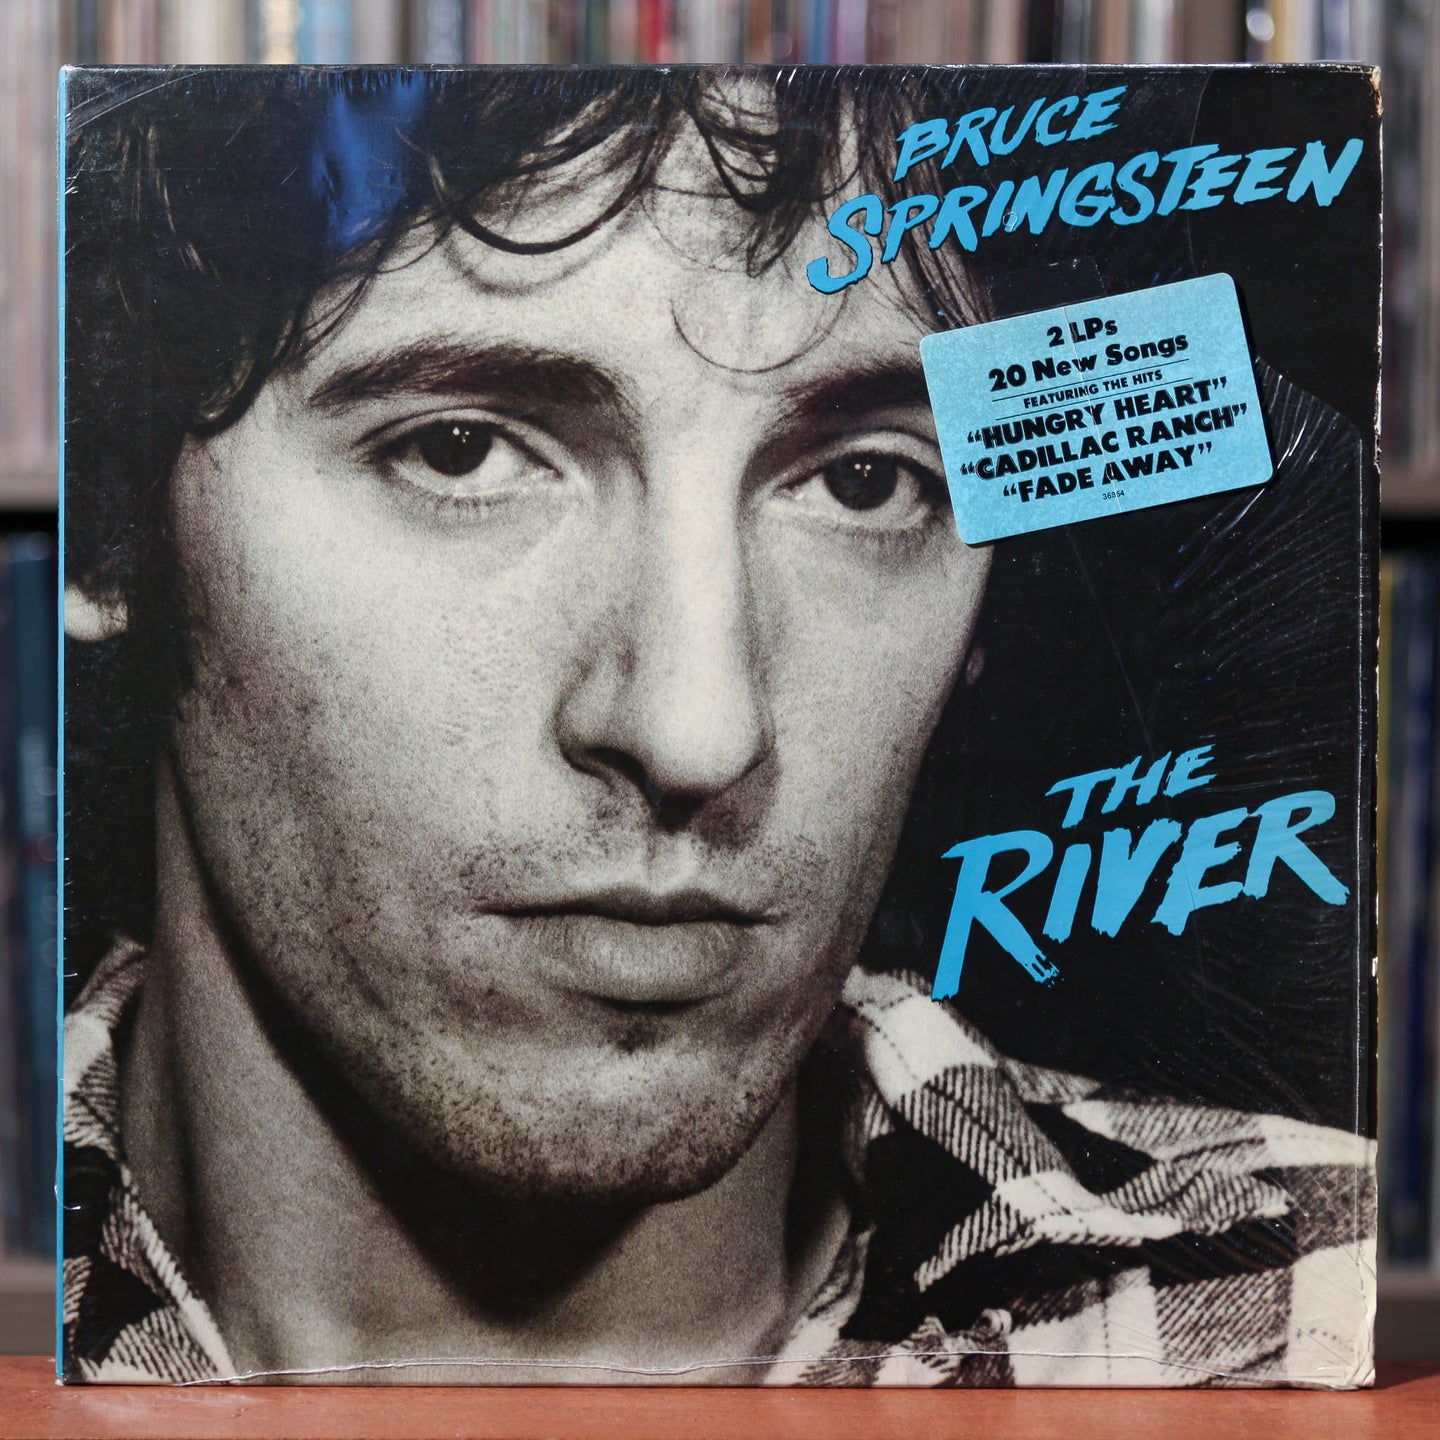 Bruce Springsteen - The River - 2LP - Rare PROMO - 1980 CBS, VG++/VG++ w/ Shrink and Hype